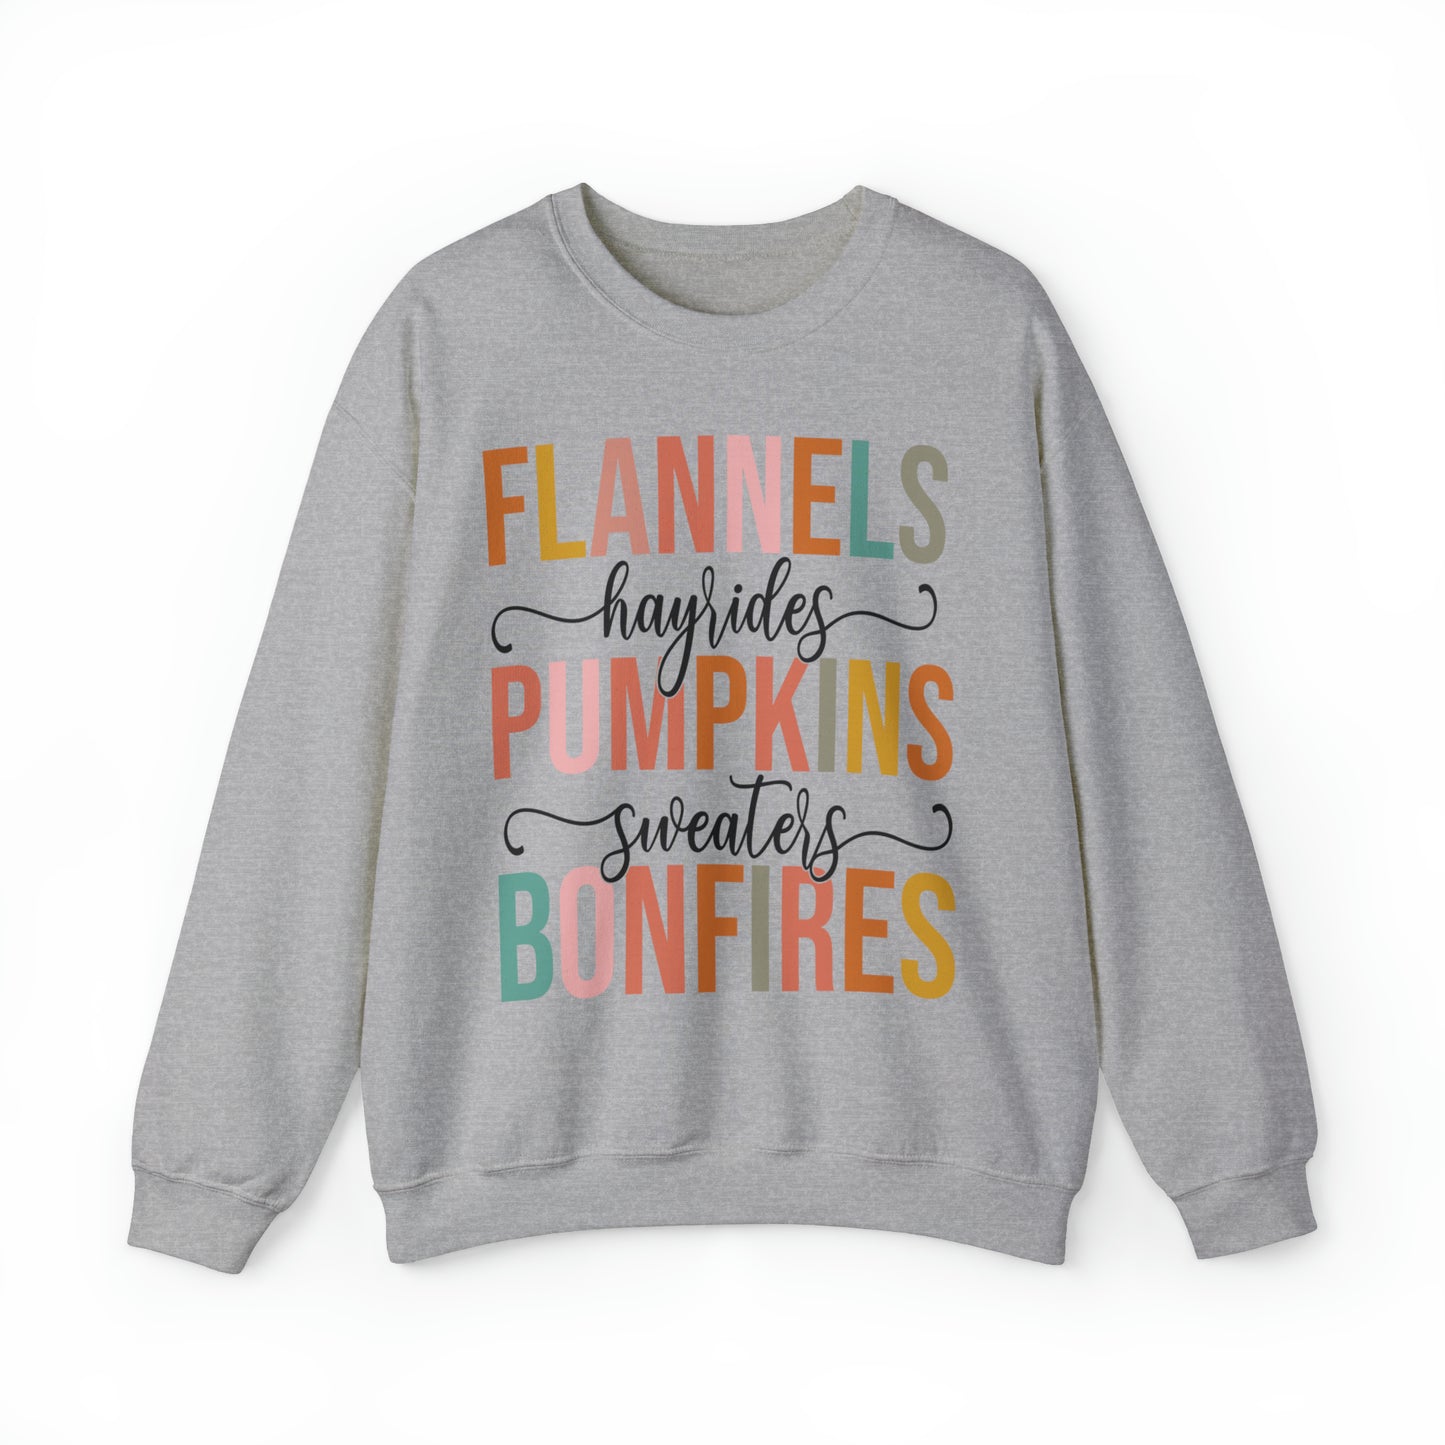 "Embrace Autumn Vibes: The Ultimate Cozy Sweatshirt Experience"